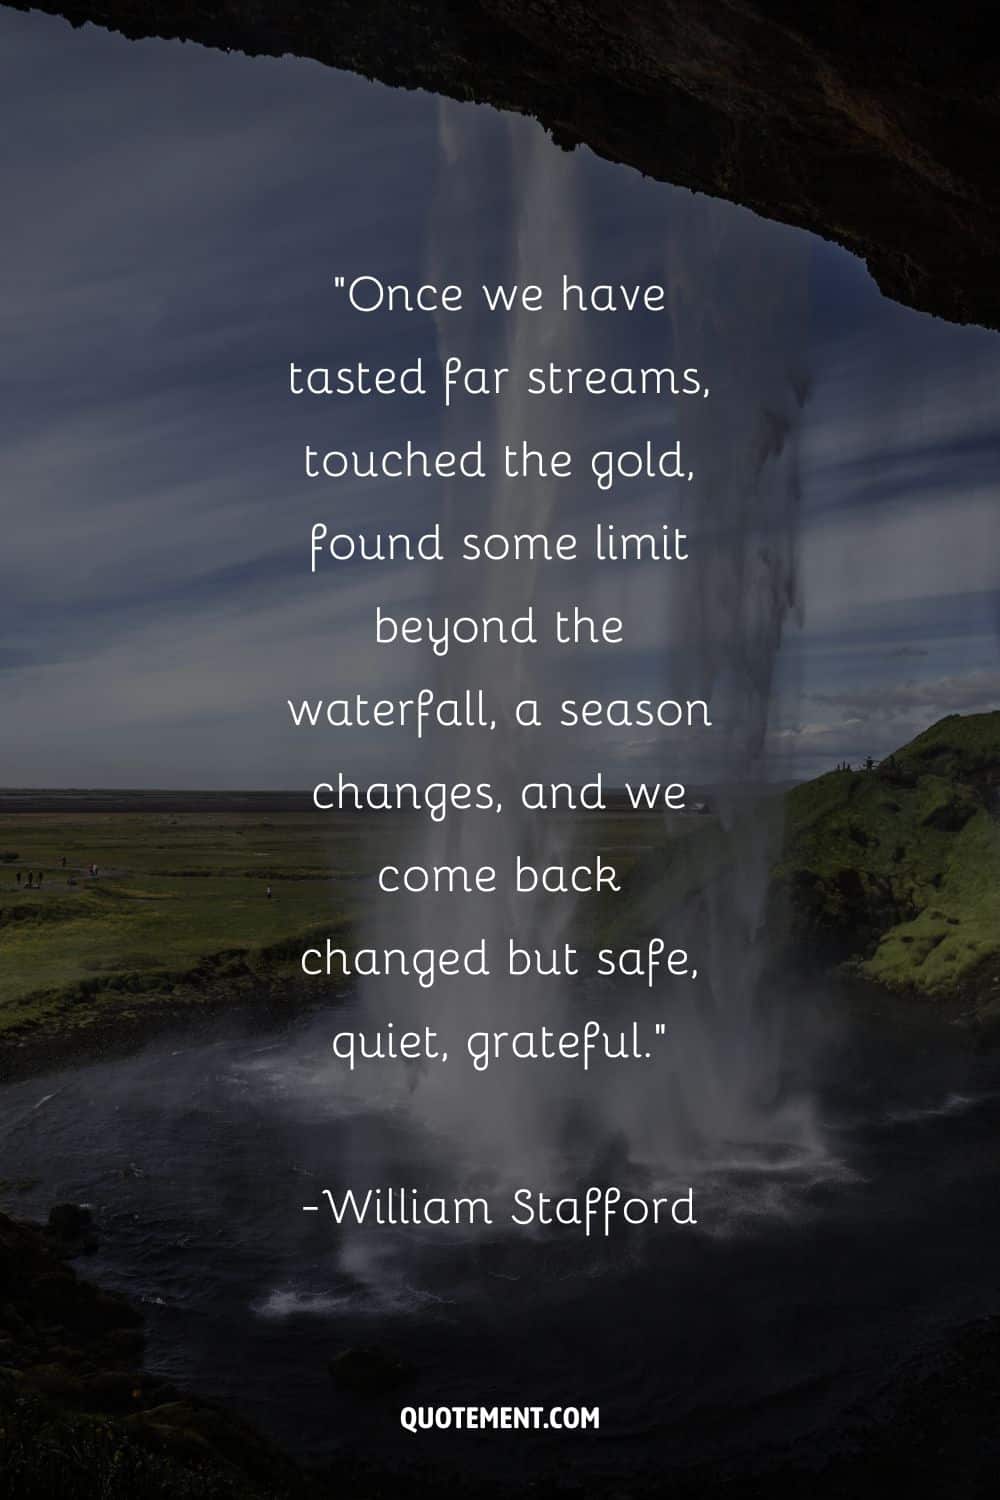 Inspirational quote by William Stafford and a waterfall in the background
